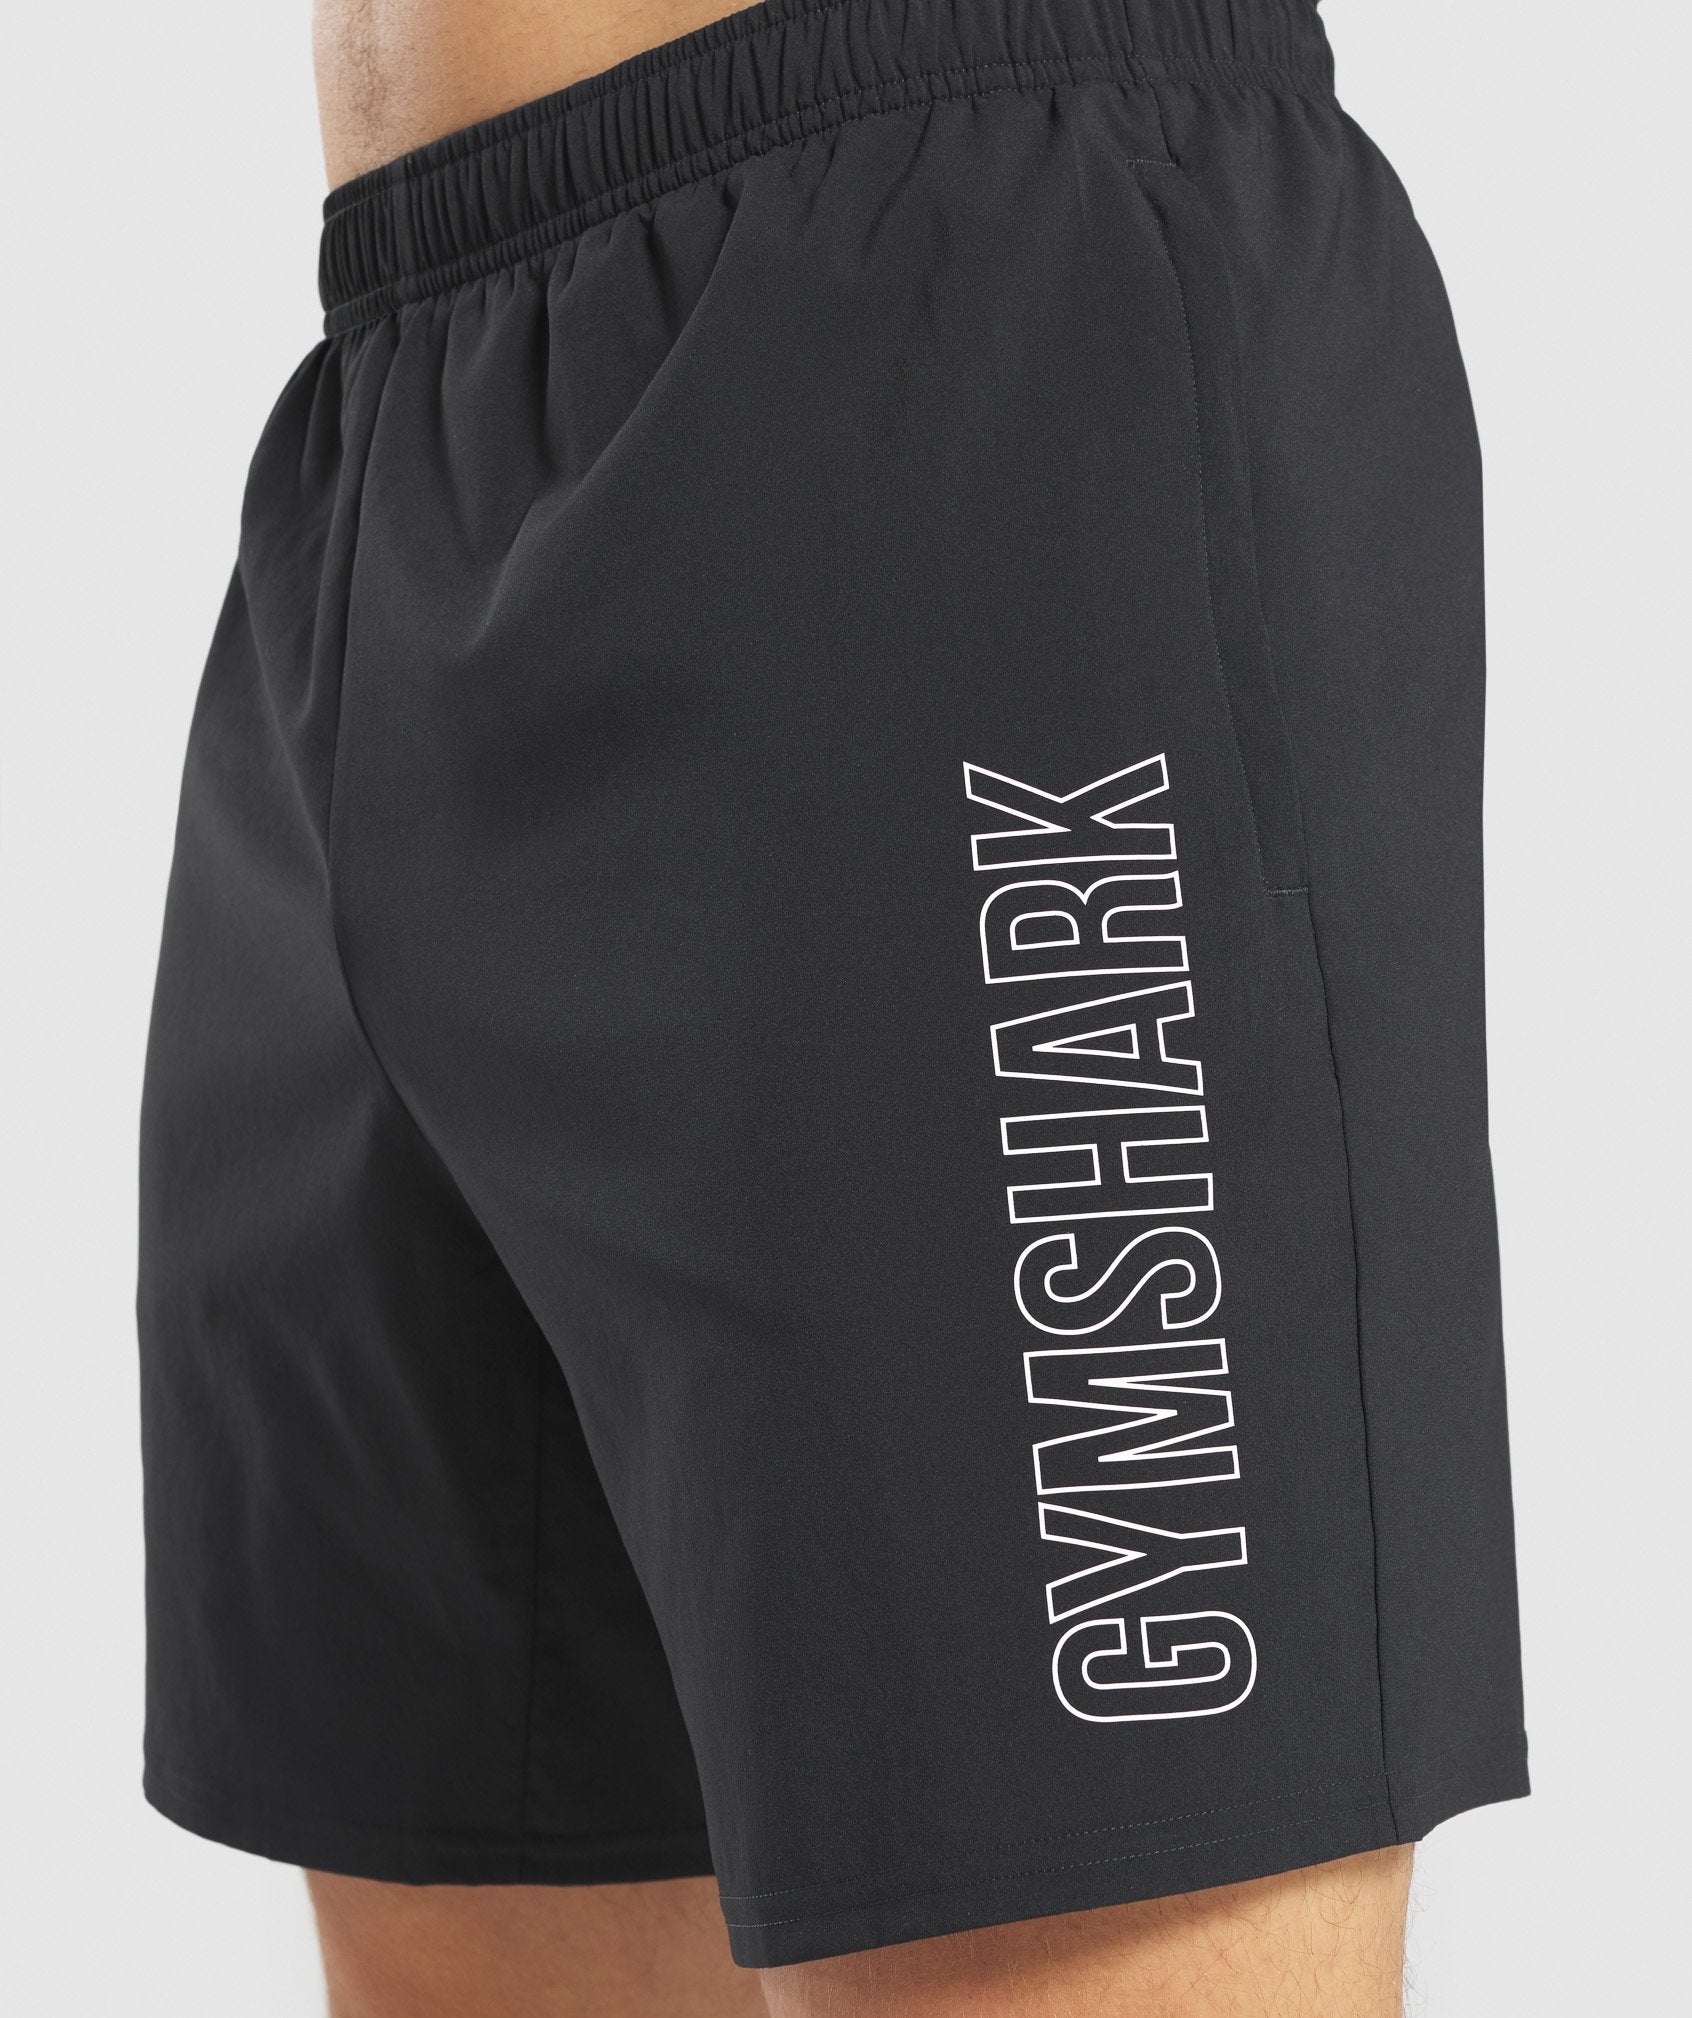 Arrival Graphic Shorts in Black